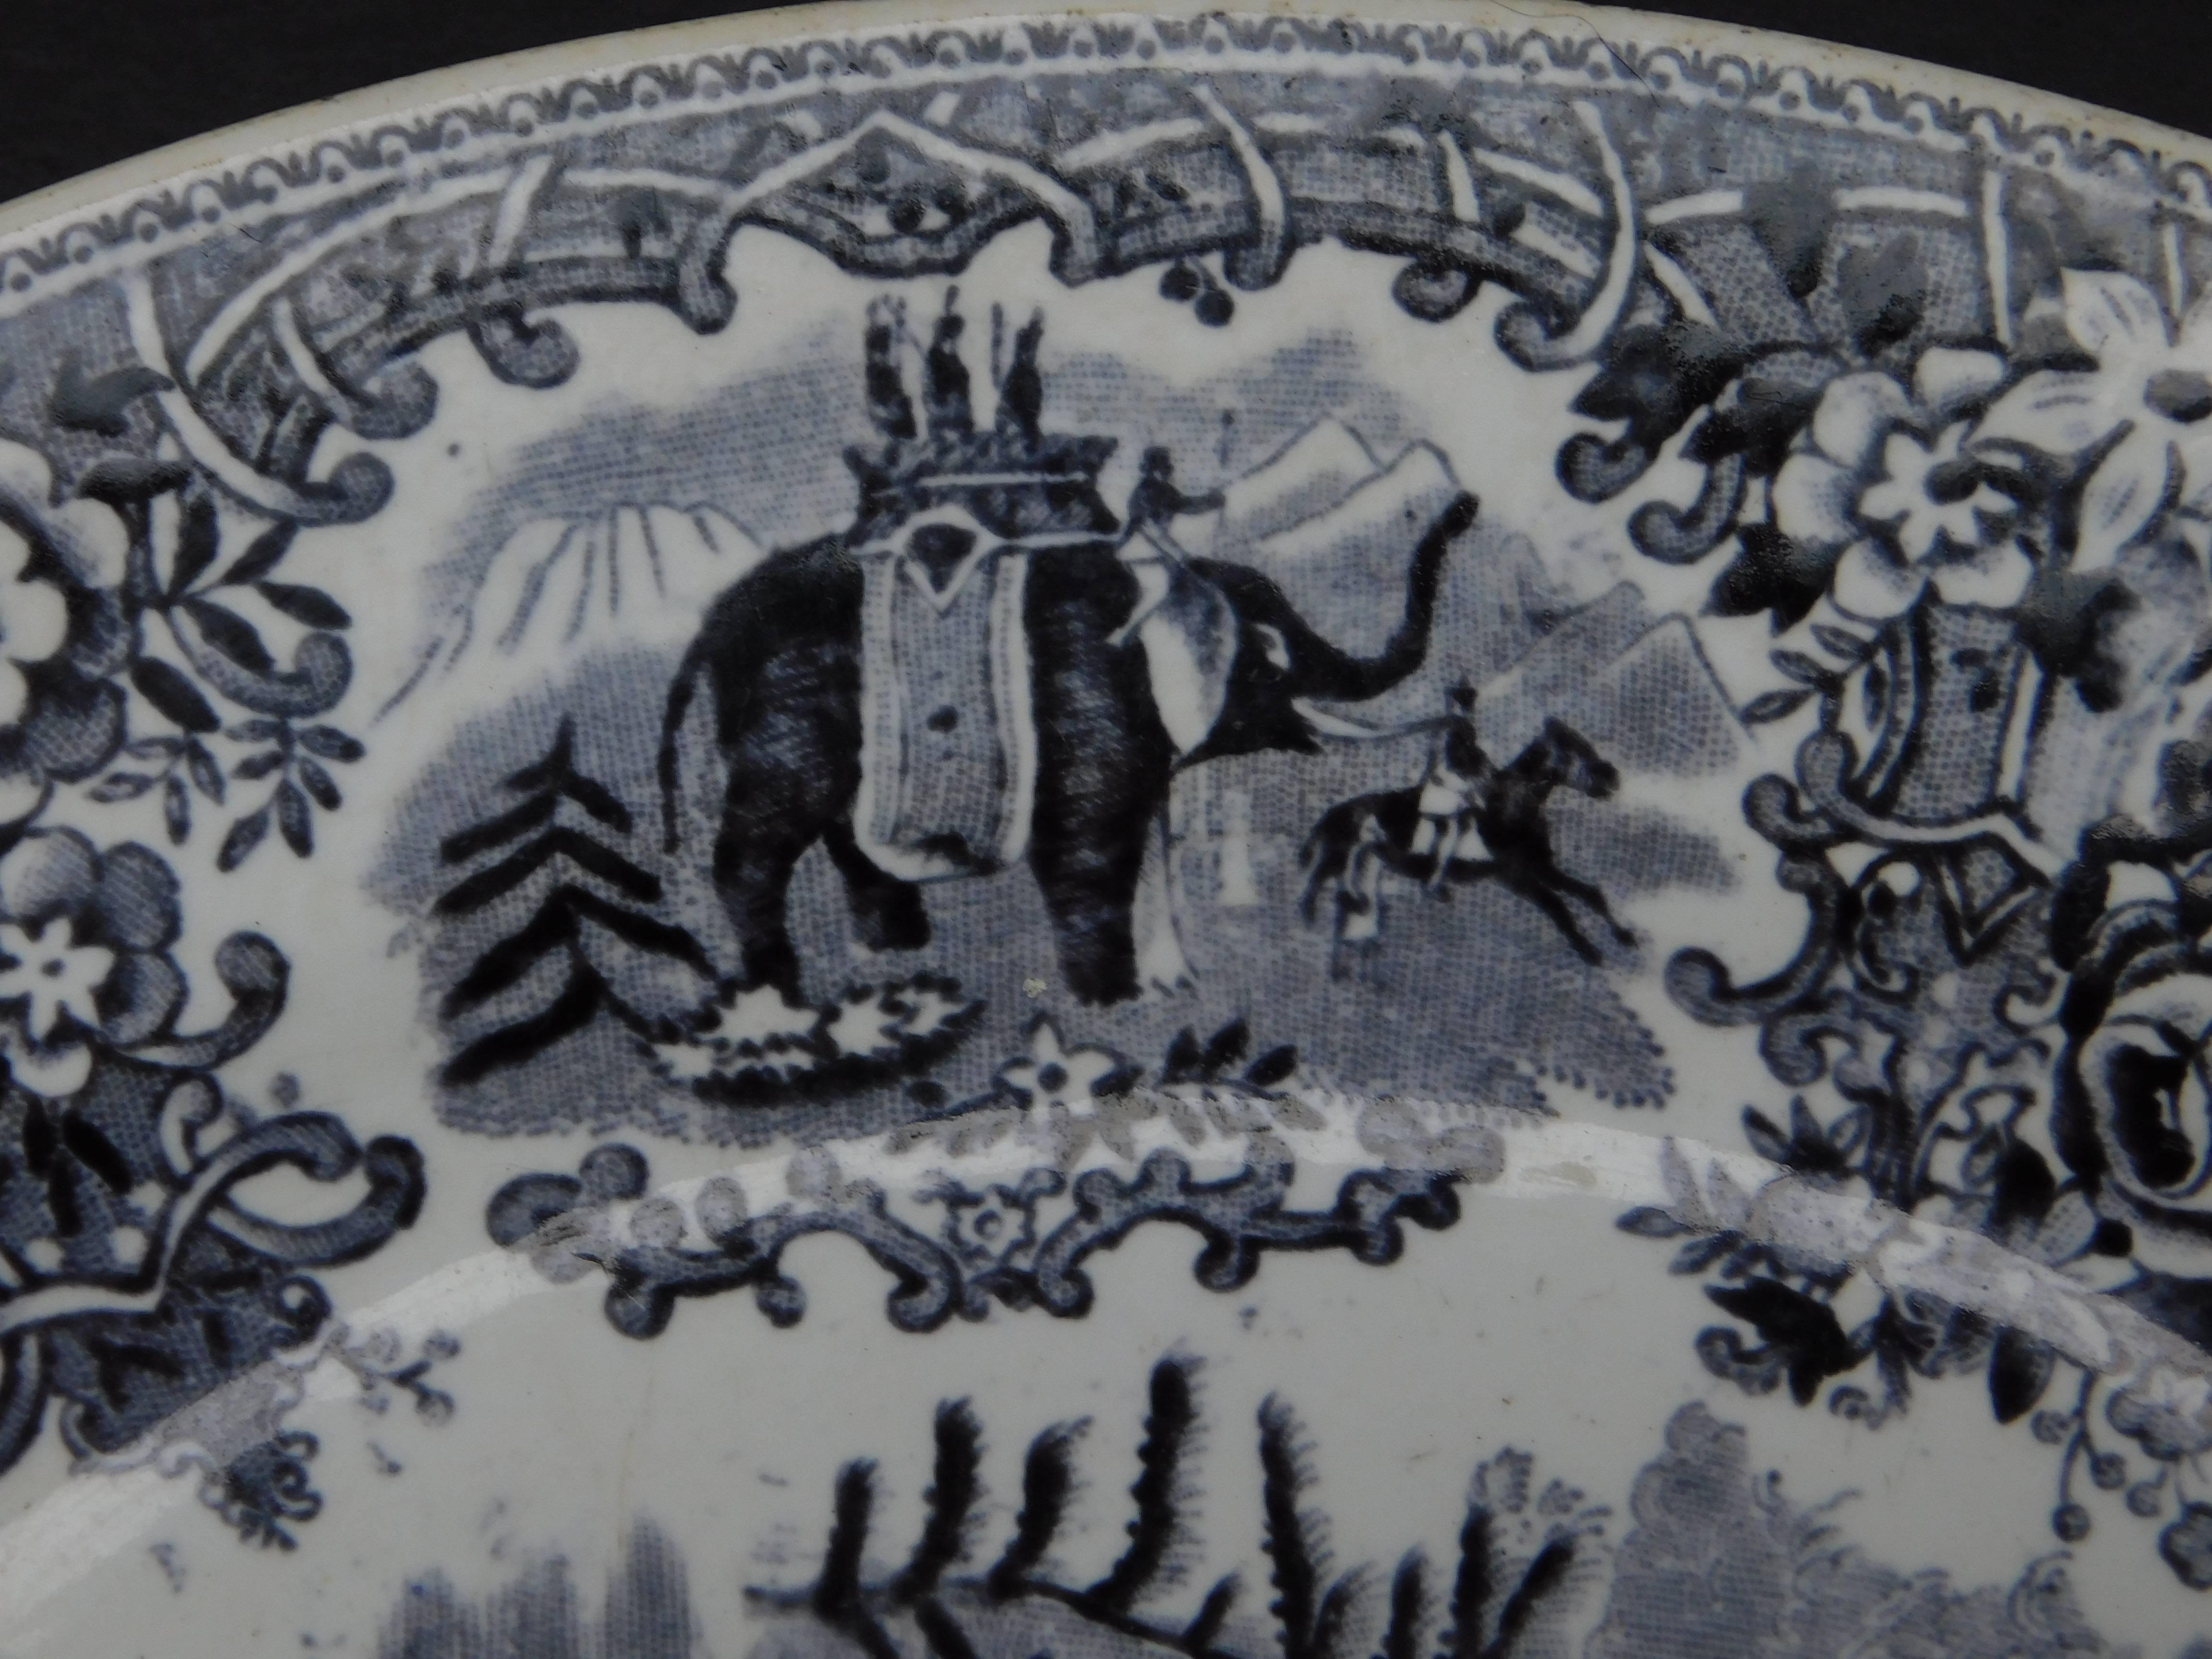 19th Century Black & White Transfer Ware Plates Showing Hanibal's Elephant Army For Sale 1